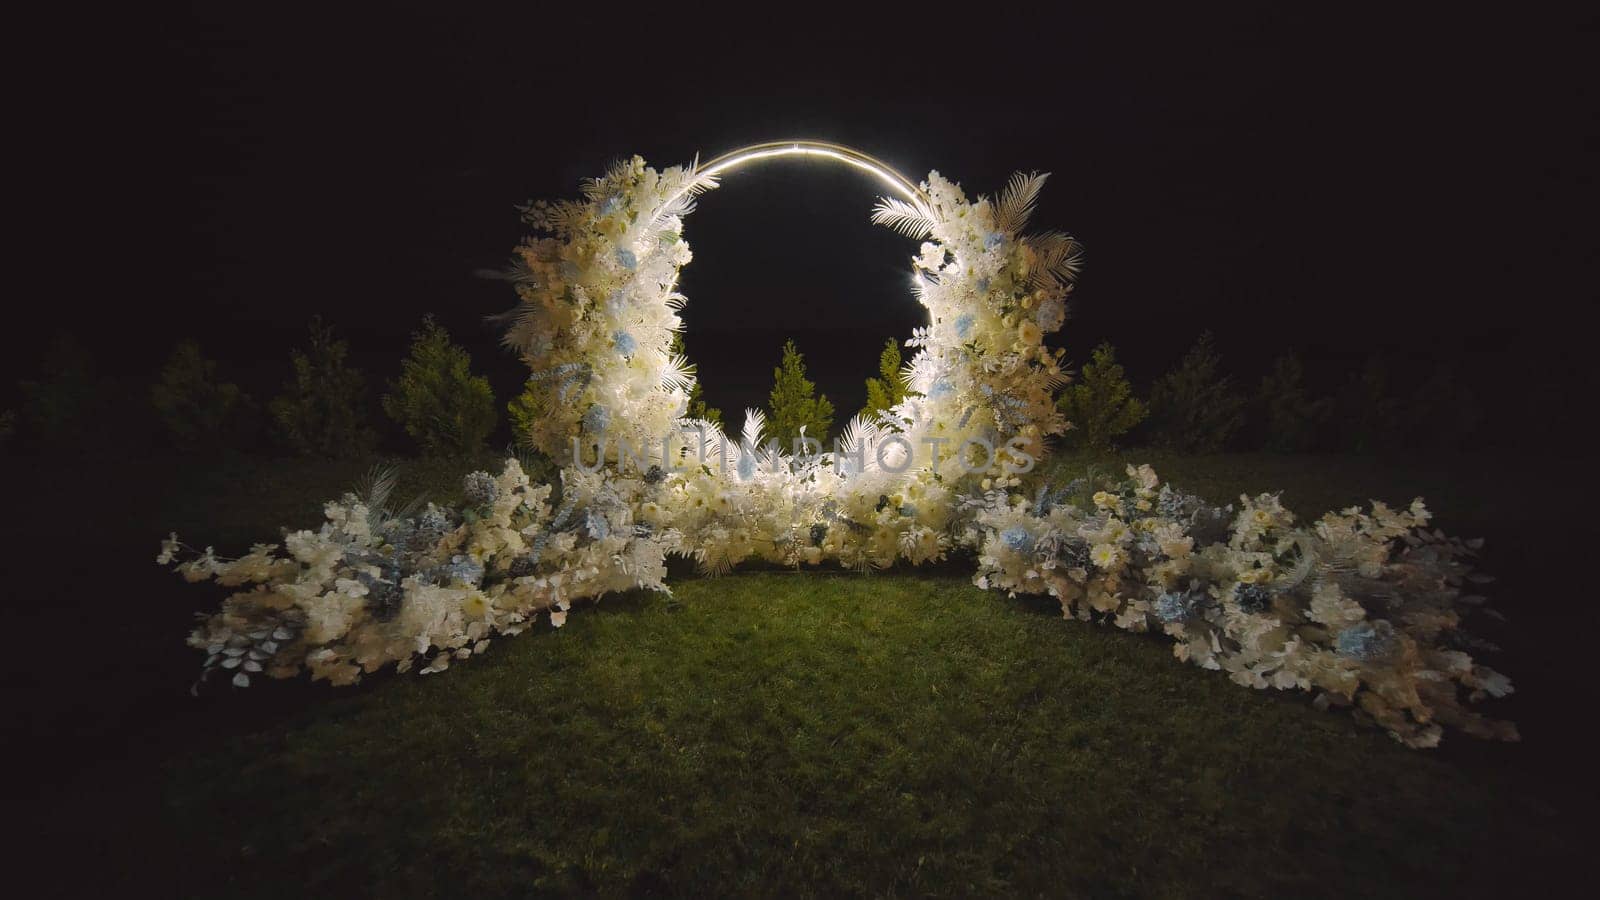 Wedding arch decorated with flowers at night. by DovidPro